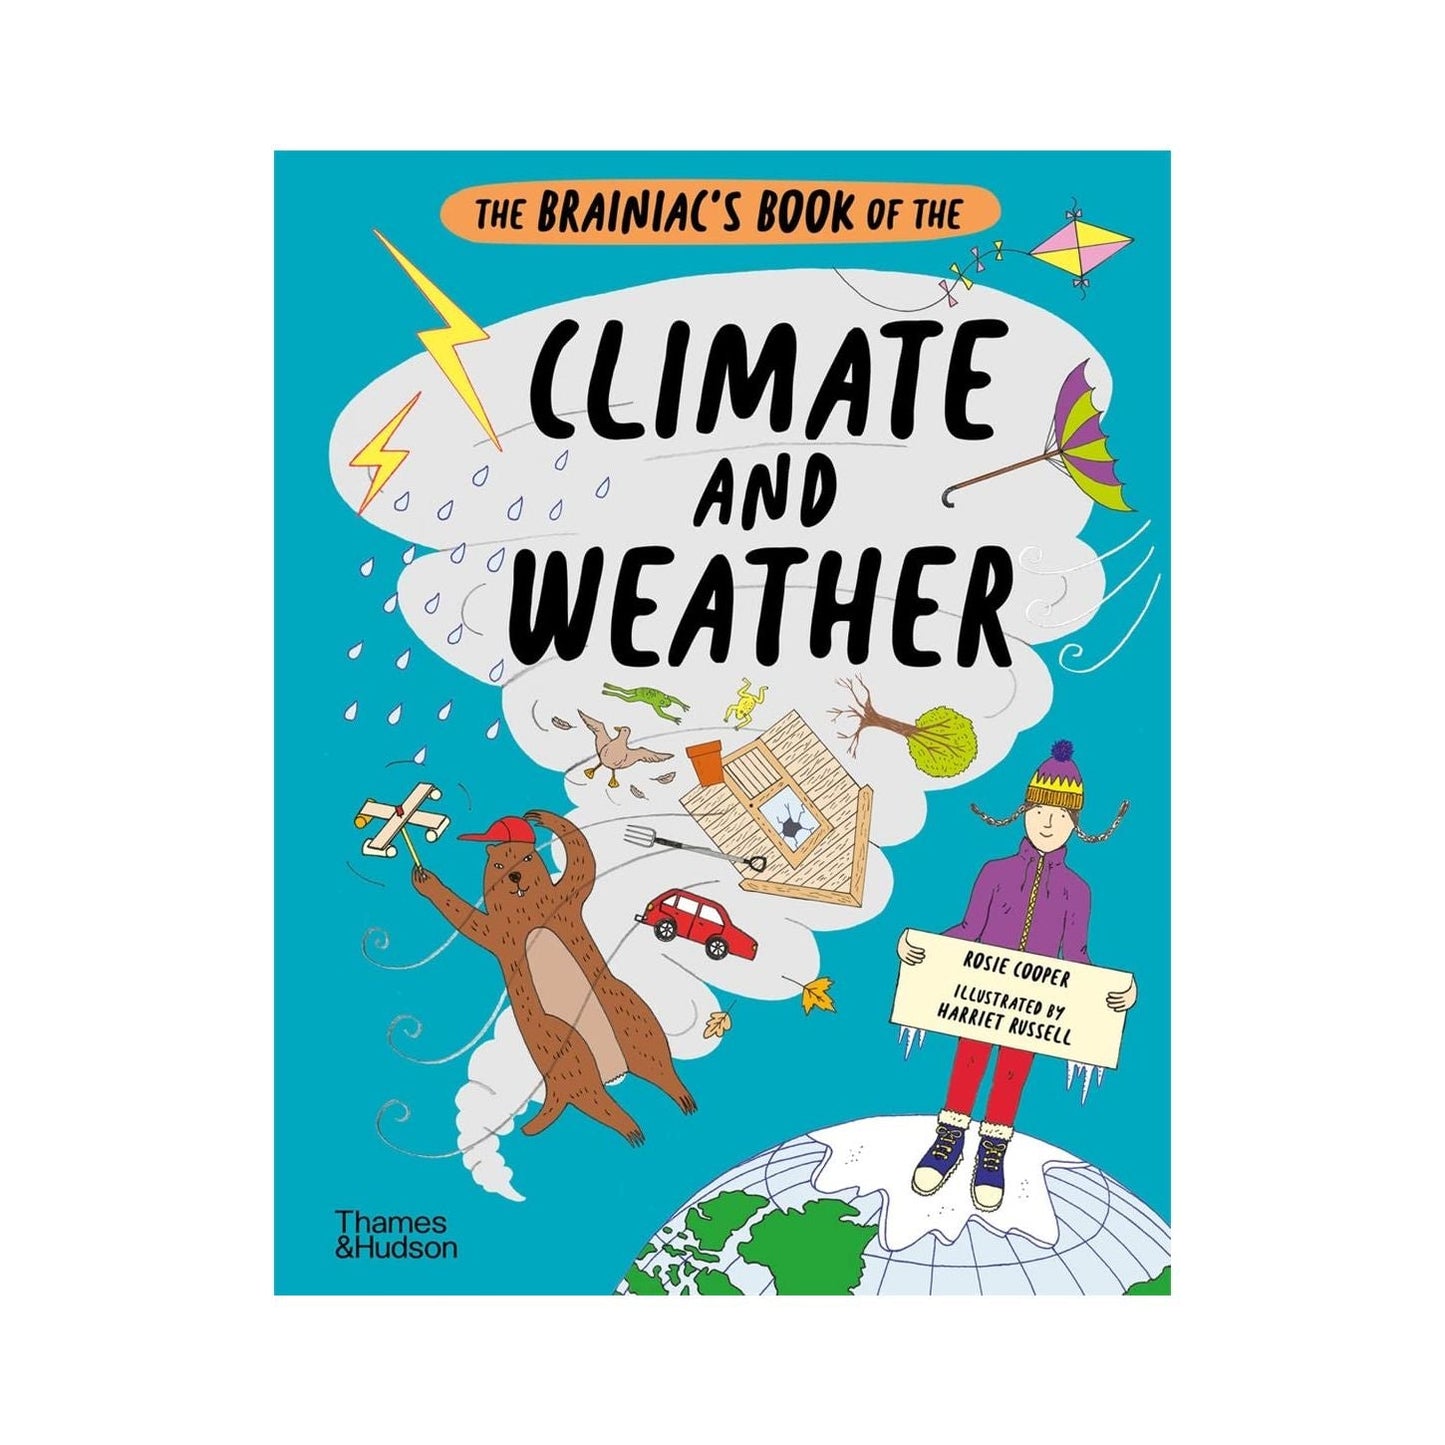 The Brainiacs Book of the Climate and Weather